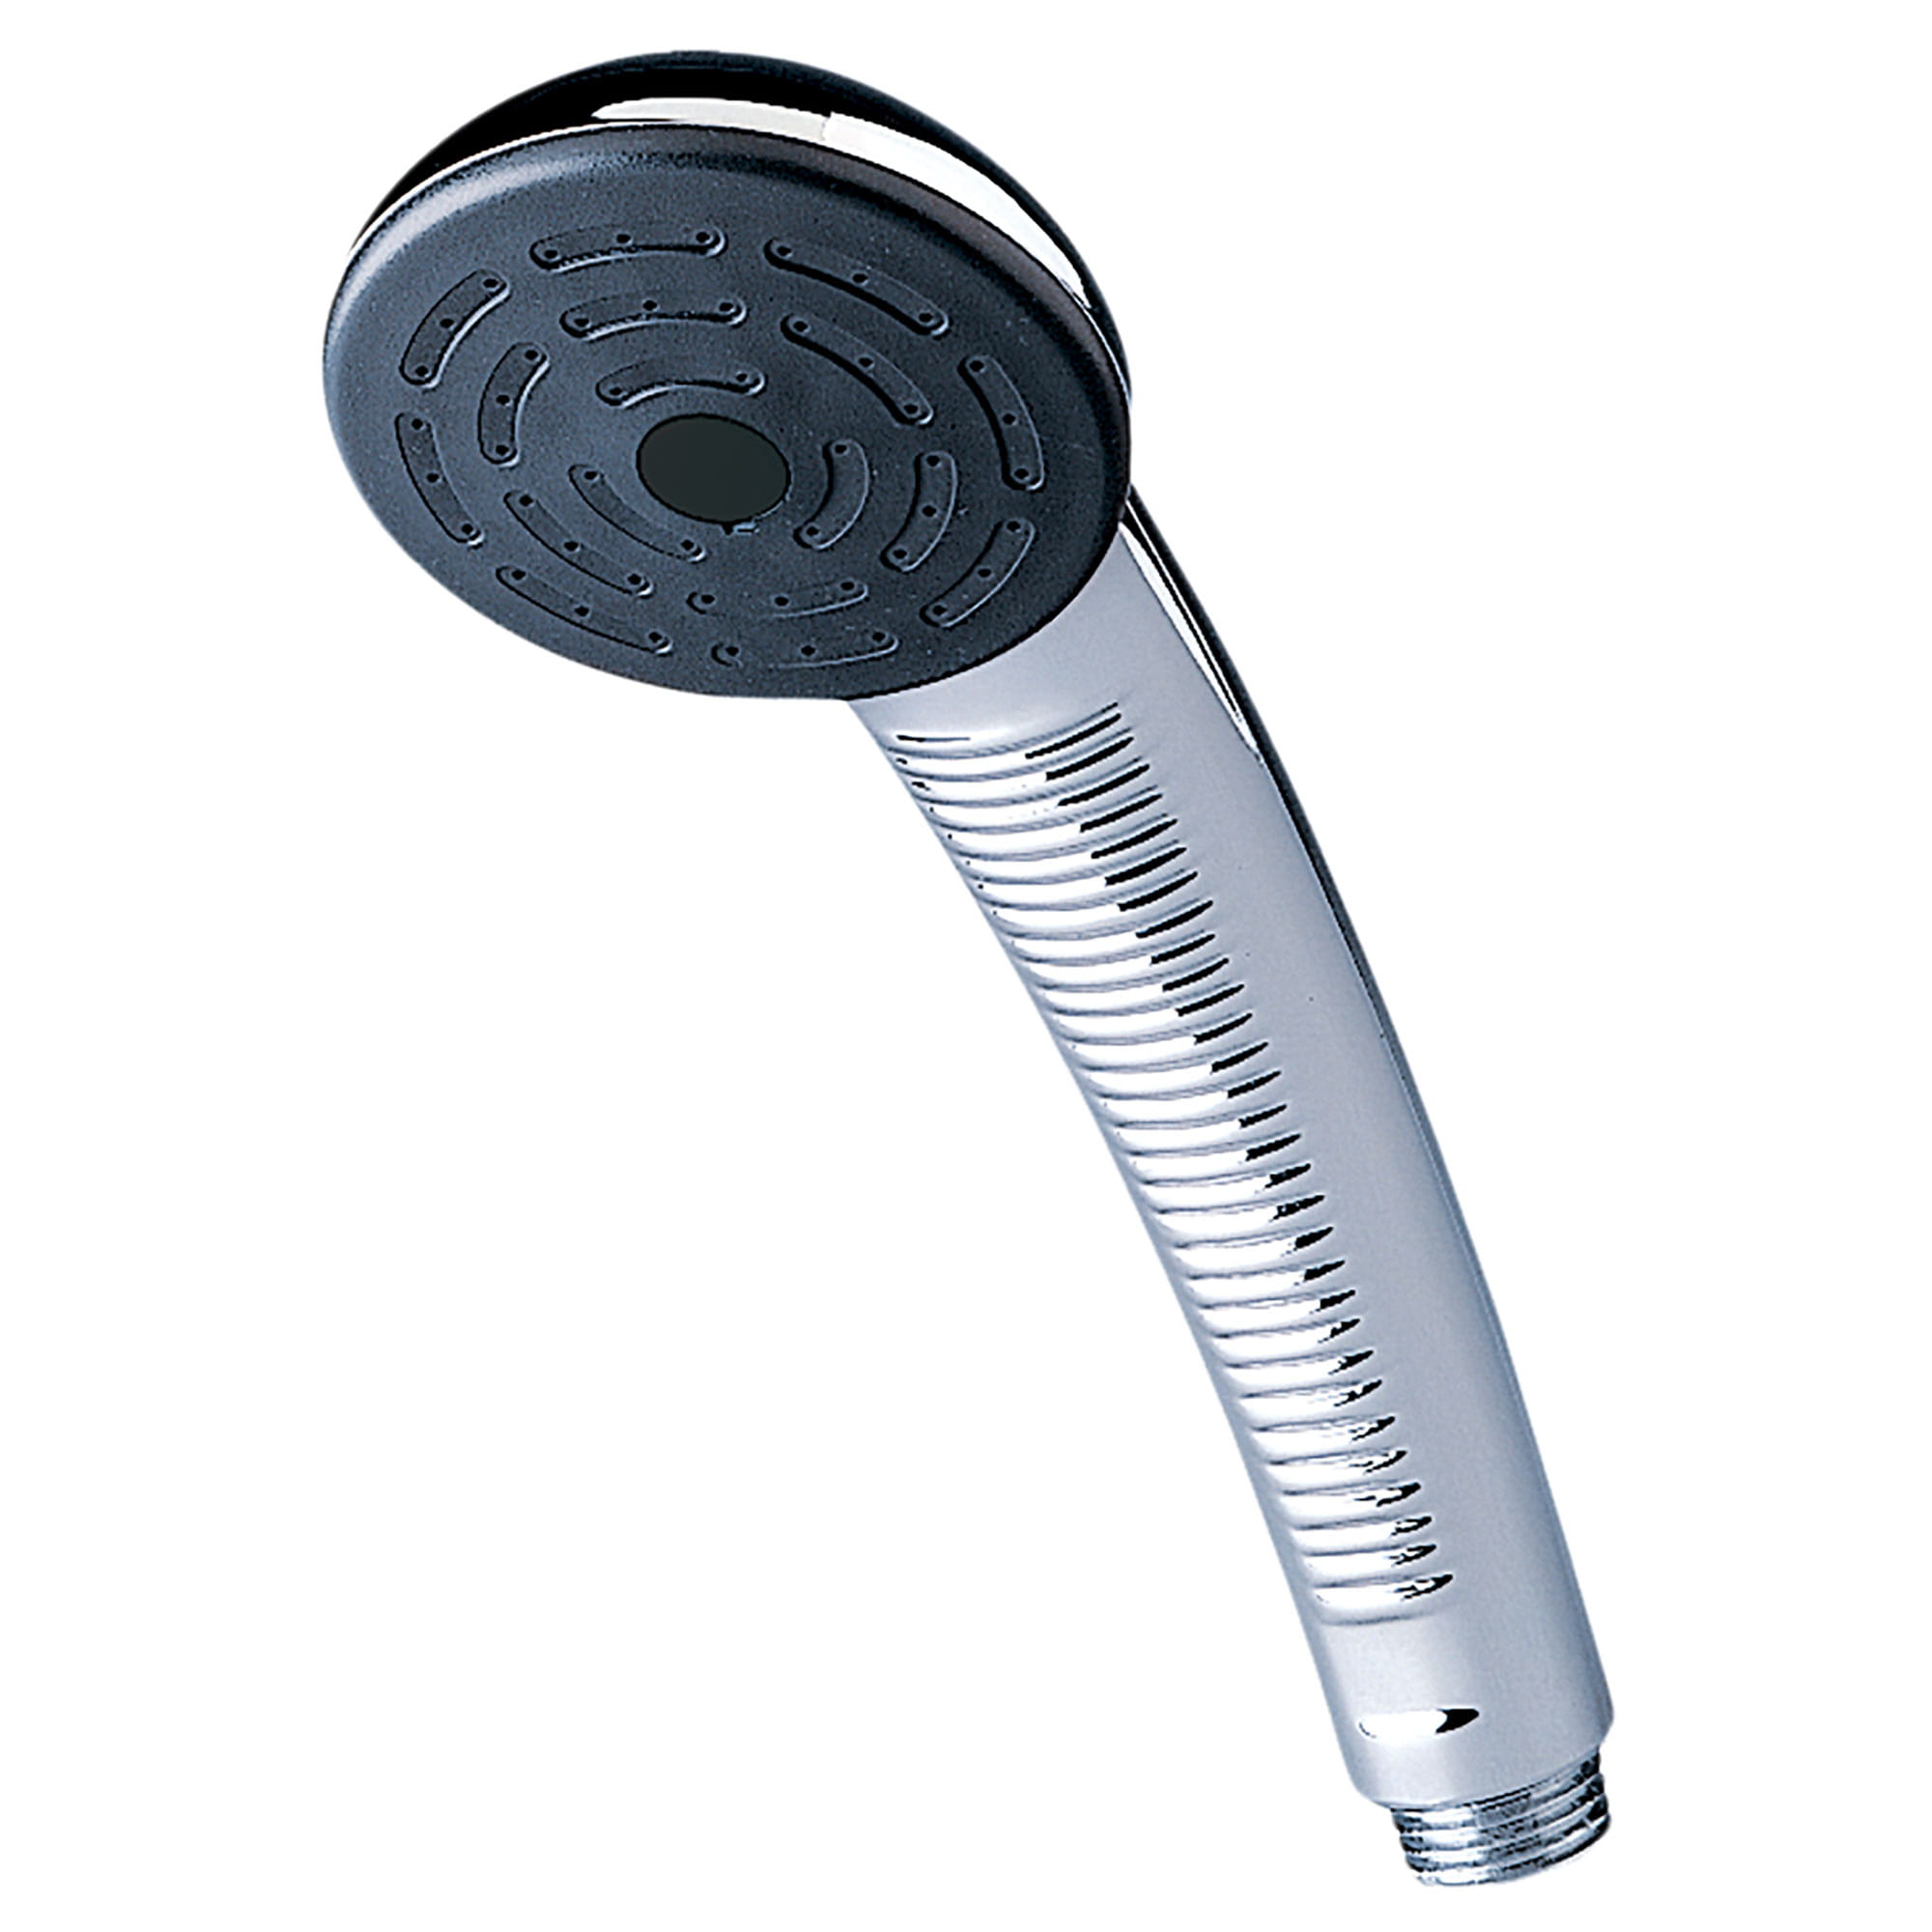 Fixed 2.5 gpm/9.5 L/min Single-Function Hand Shower